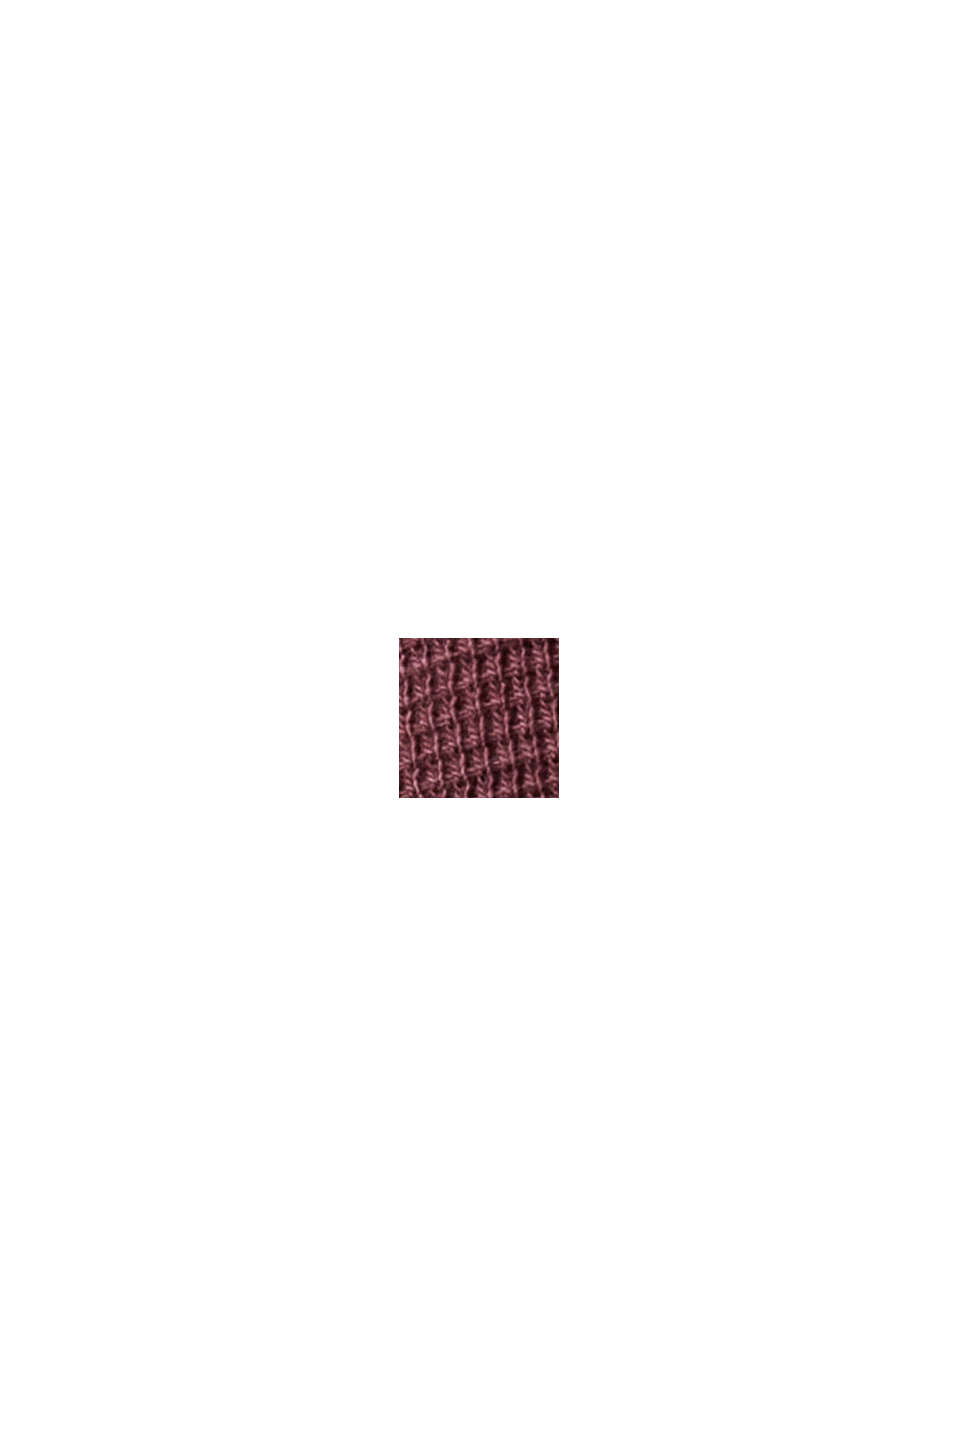 Waffle piqué long sleeve top, BORDEAUX RED, swatch